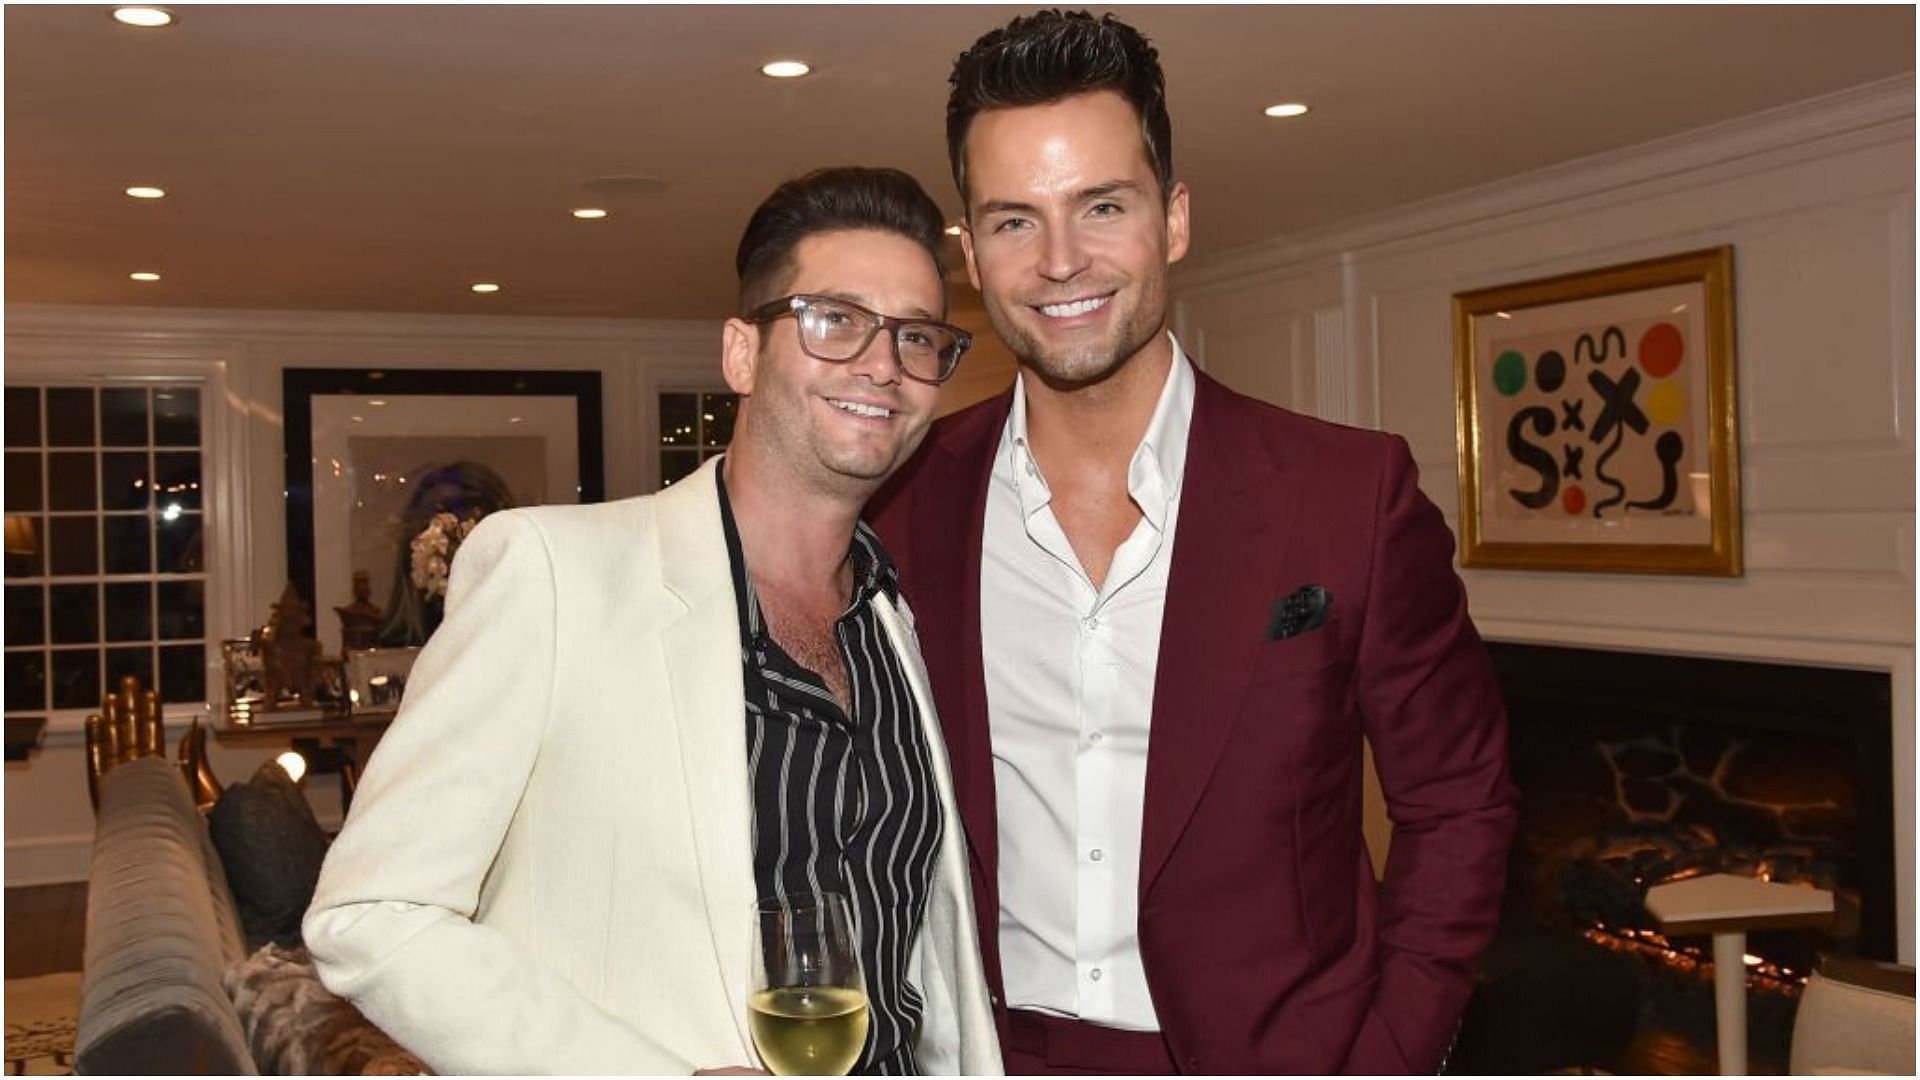 Josh Flagg and Bobby Boyd are divorcing after being married for 5 years (Image via Patrick McMullan/Getty Images)